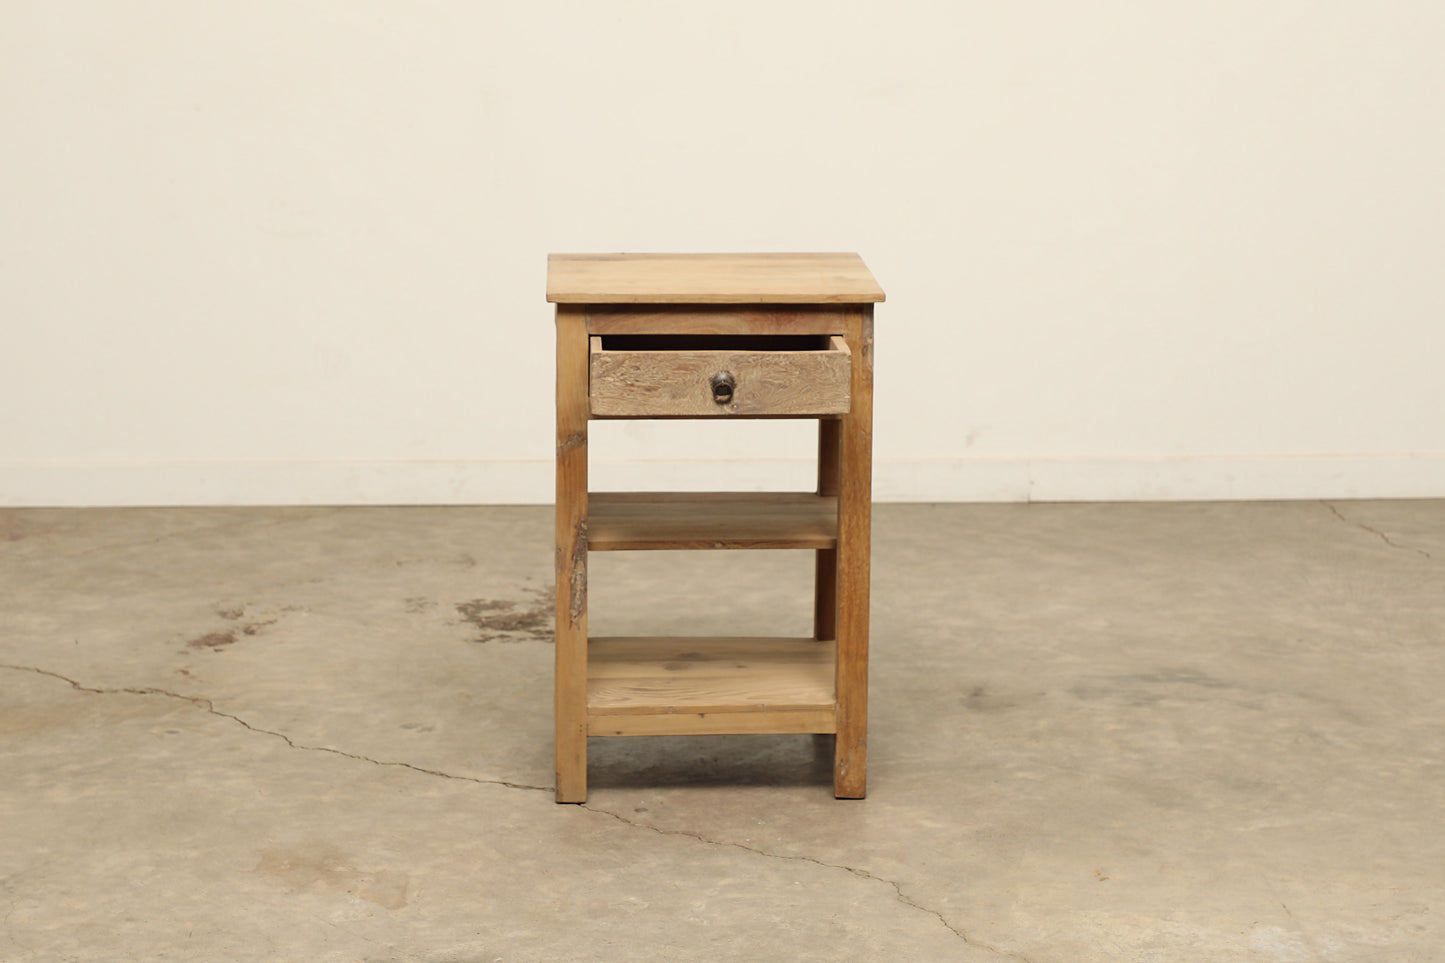 (PP219) Woody Side Table (19x16x30)